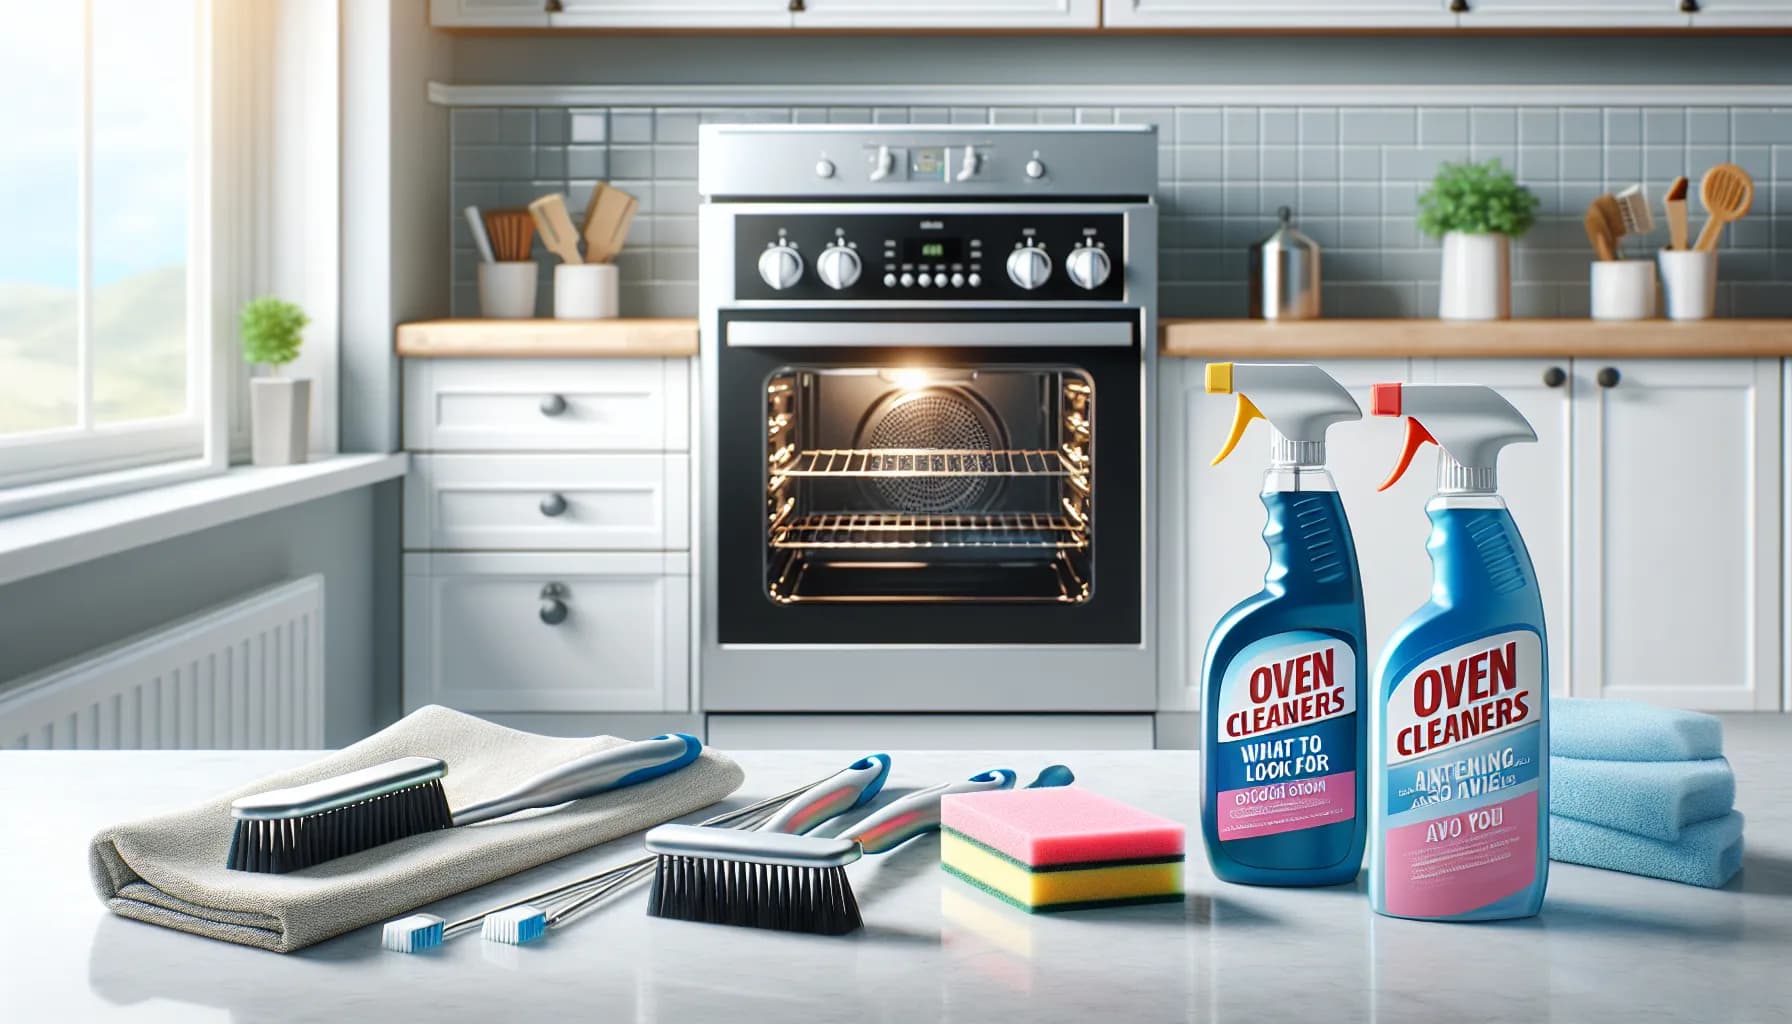 Three oven cleaning products and tools on a clean counter, next to a sparkling oven. Text: 'Oven Cleaners: What to Look For and Avoid.'